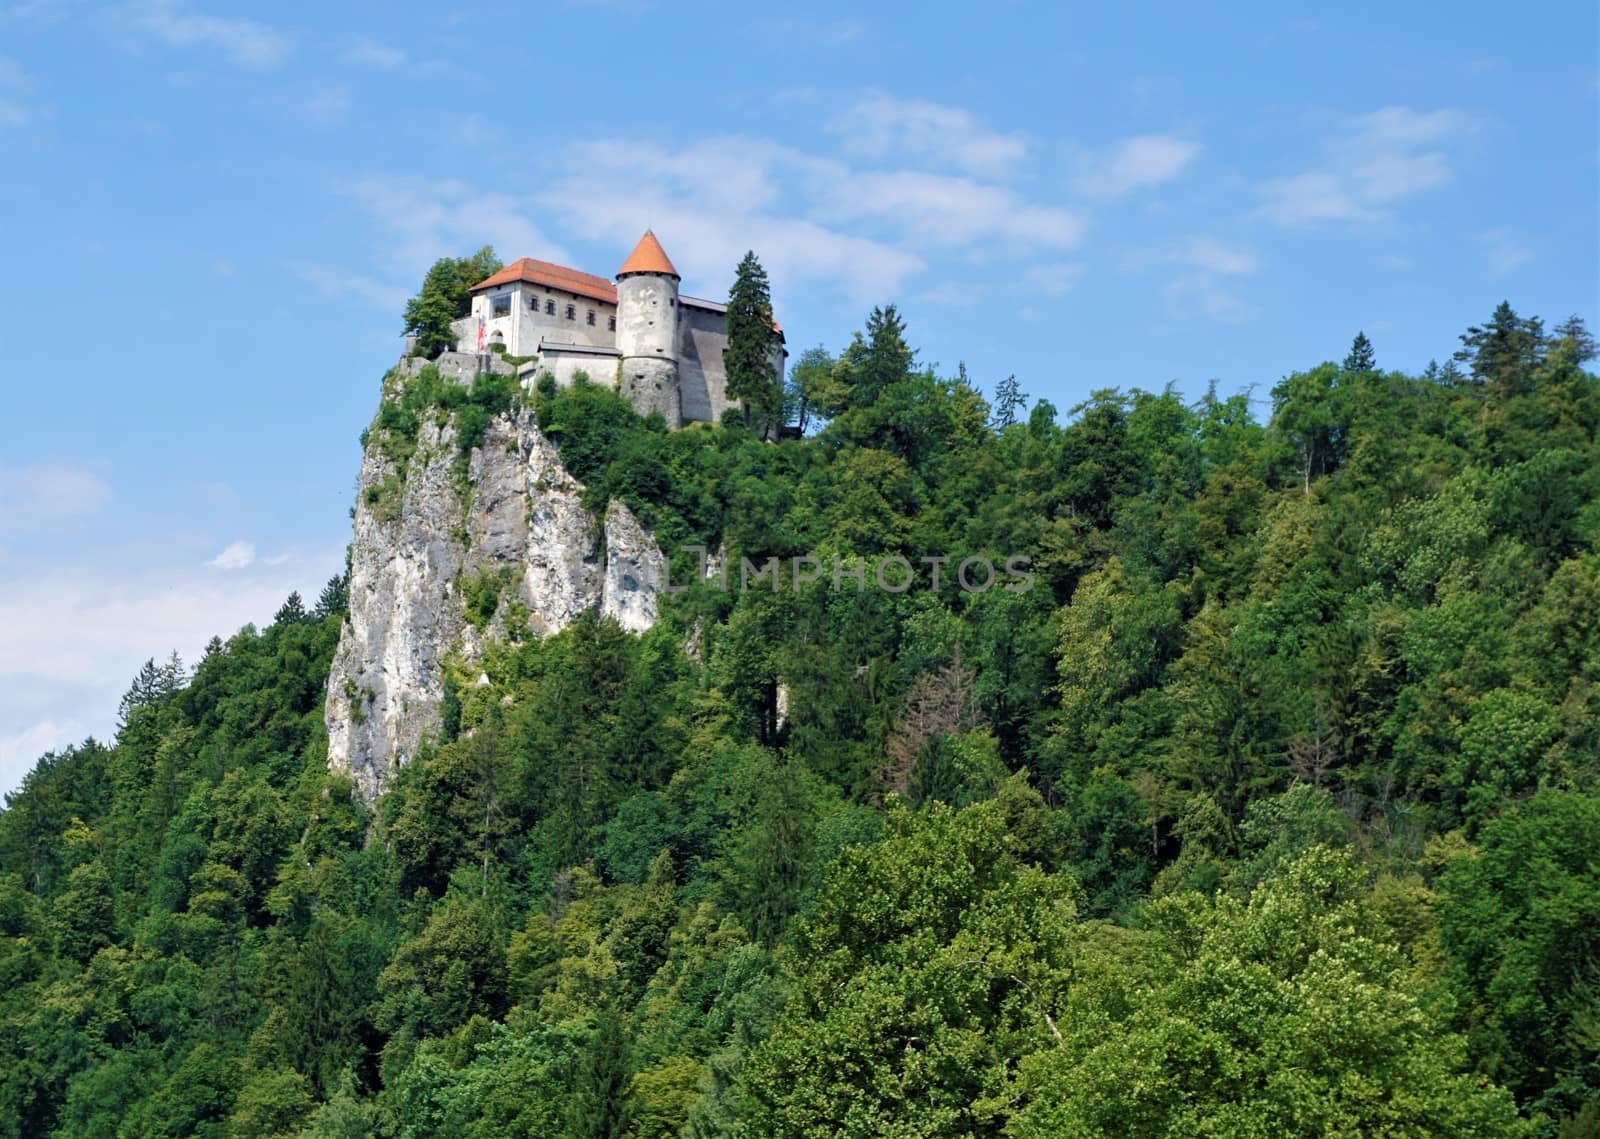 Bled castle enthroned on a rock by pisces2386